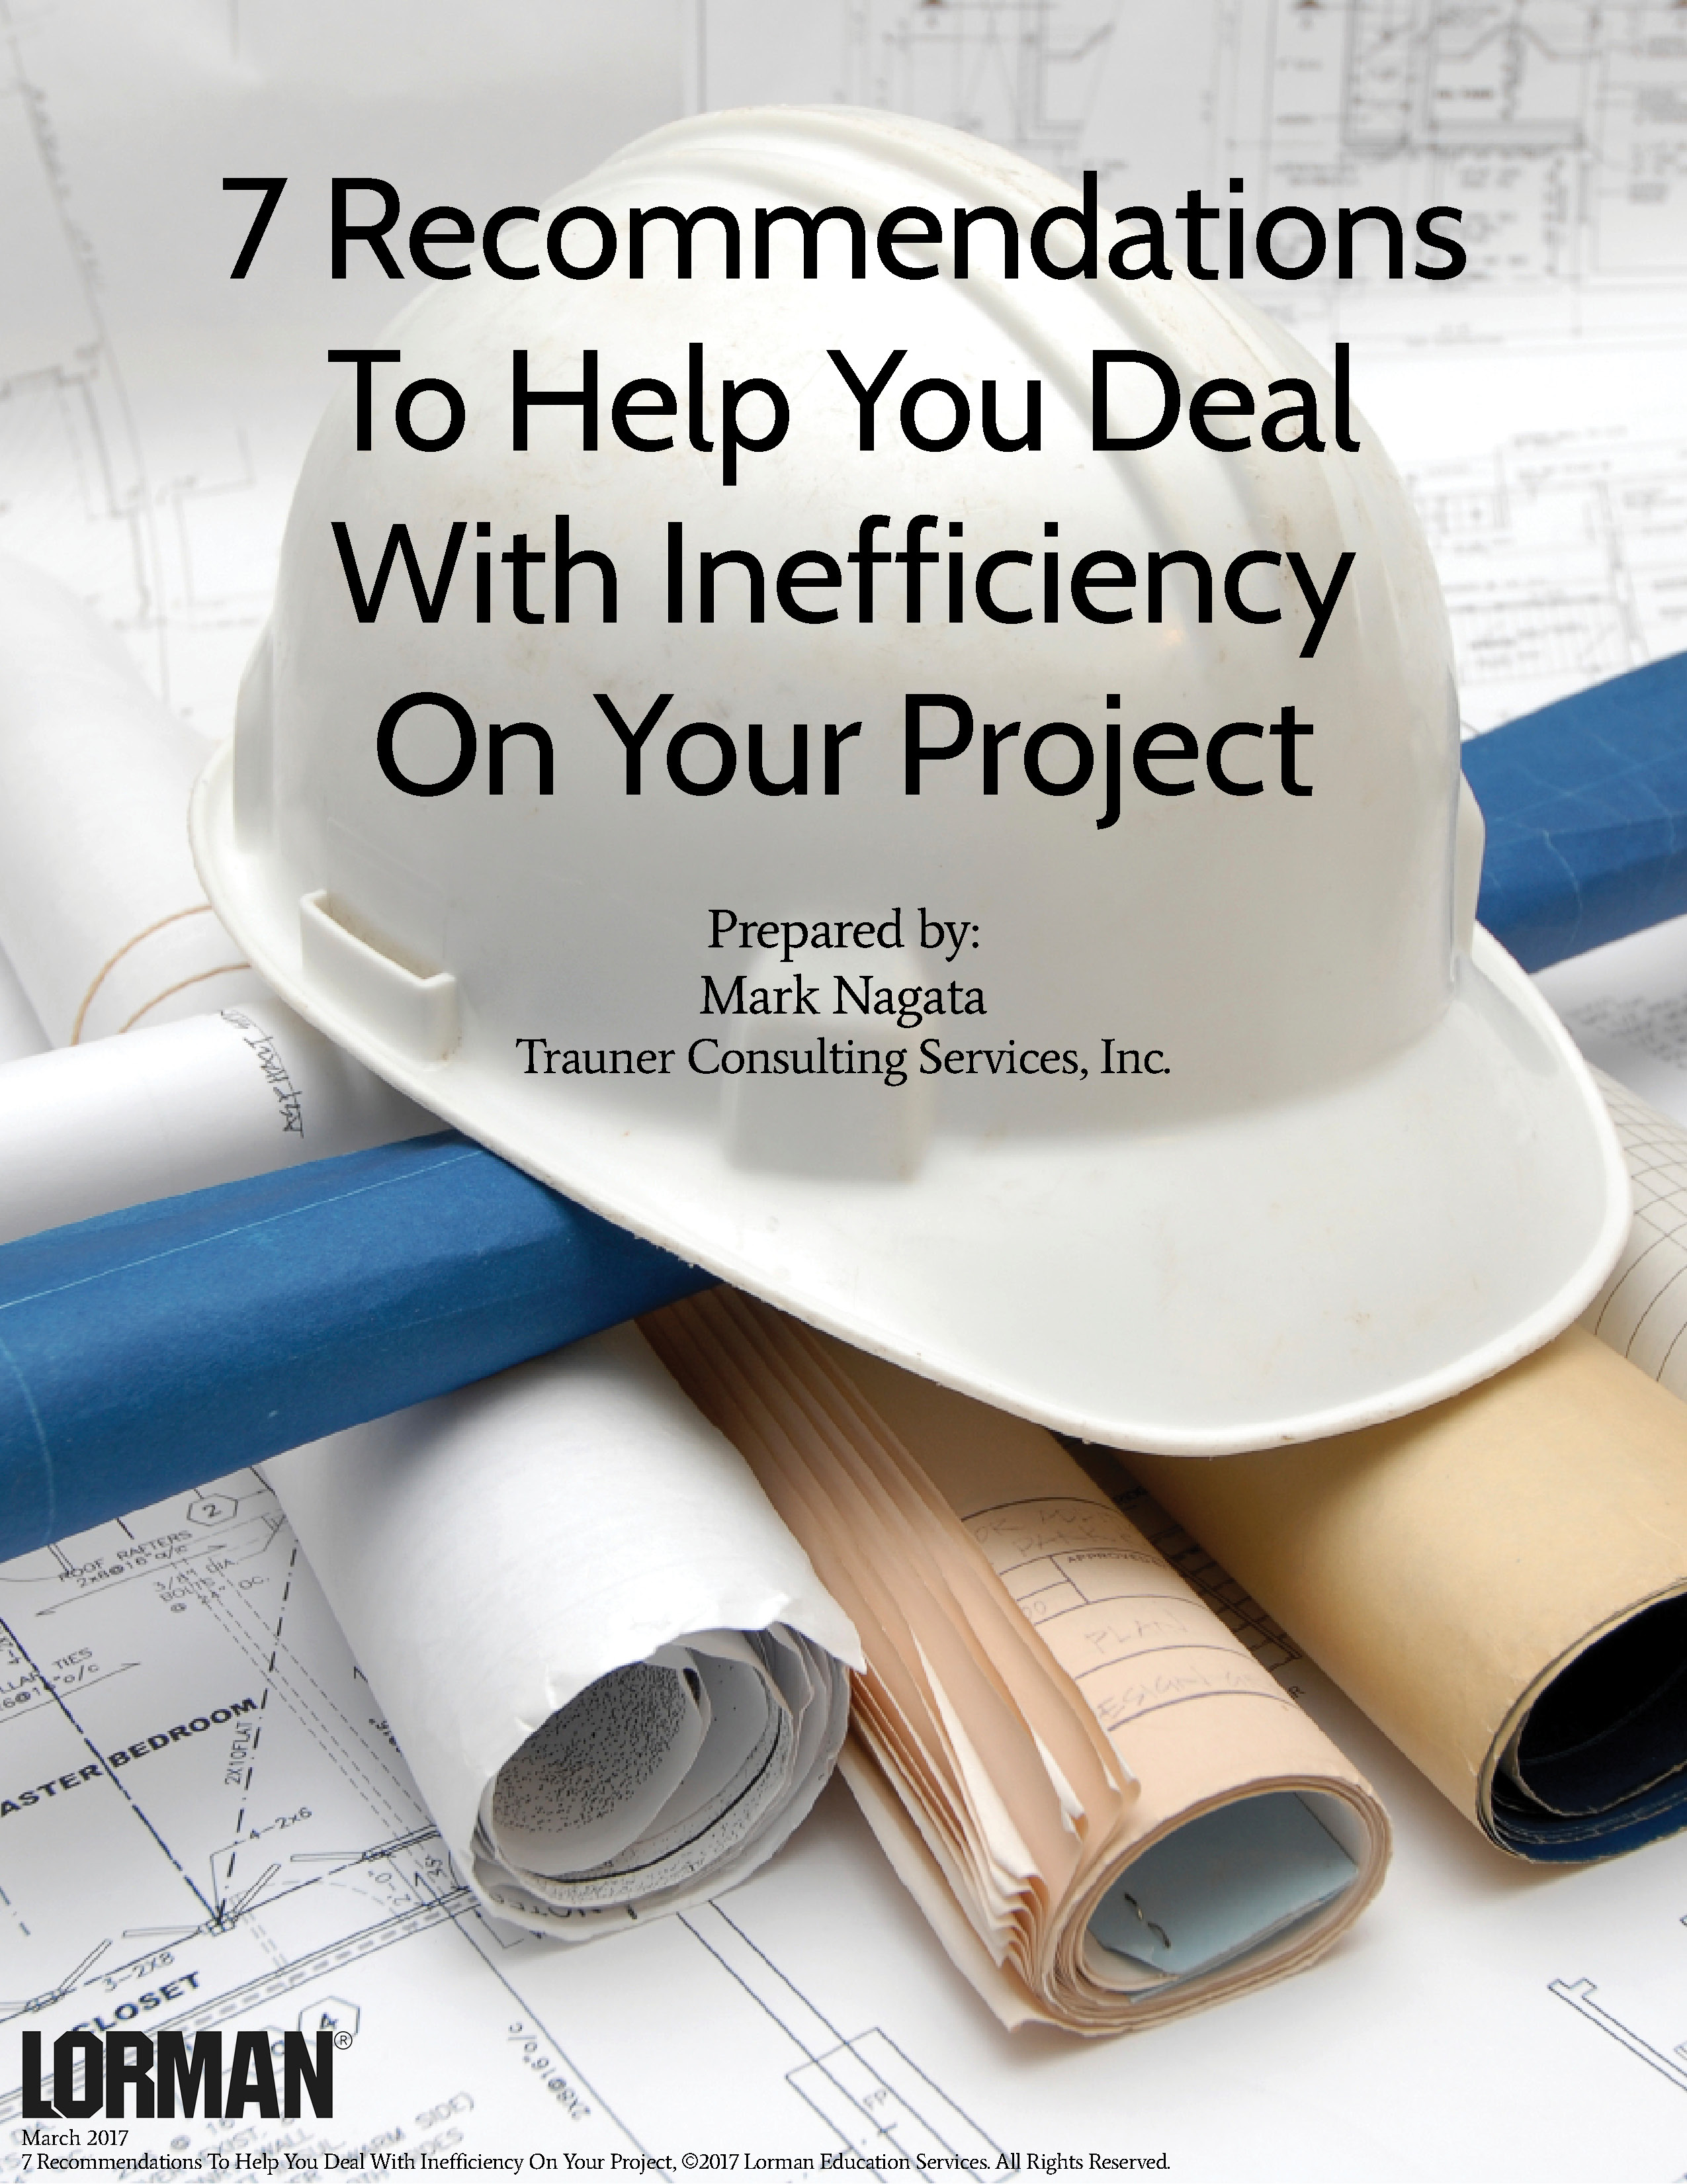 7 Recommendations To Help You Deal With Inefficiency On Your Project